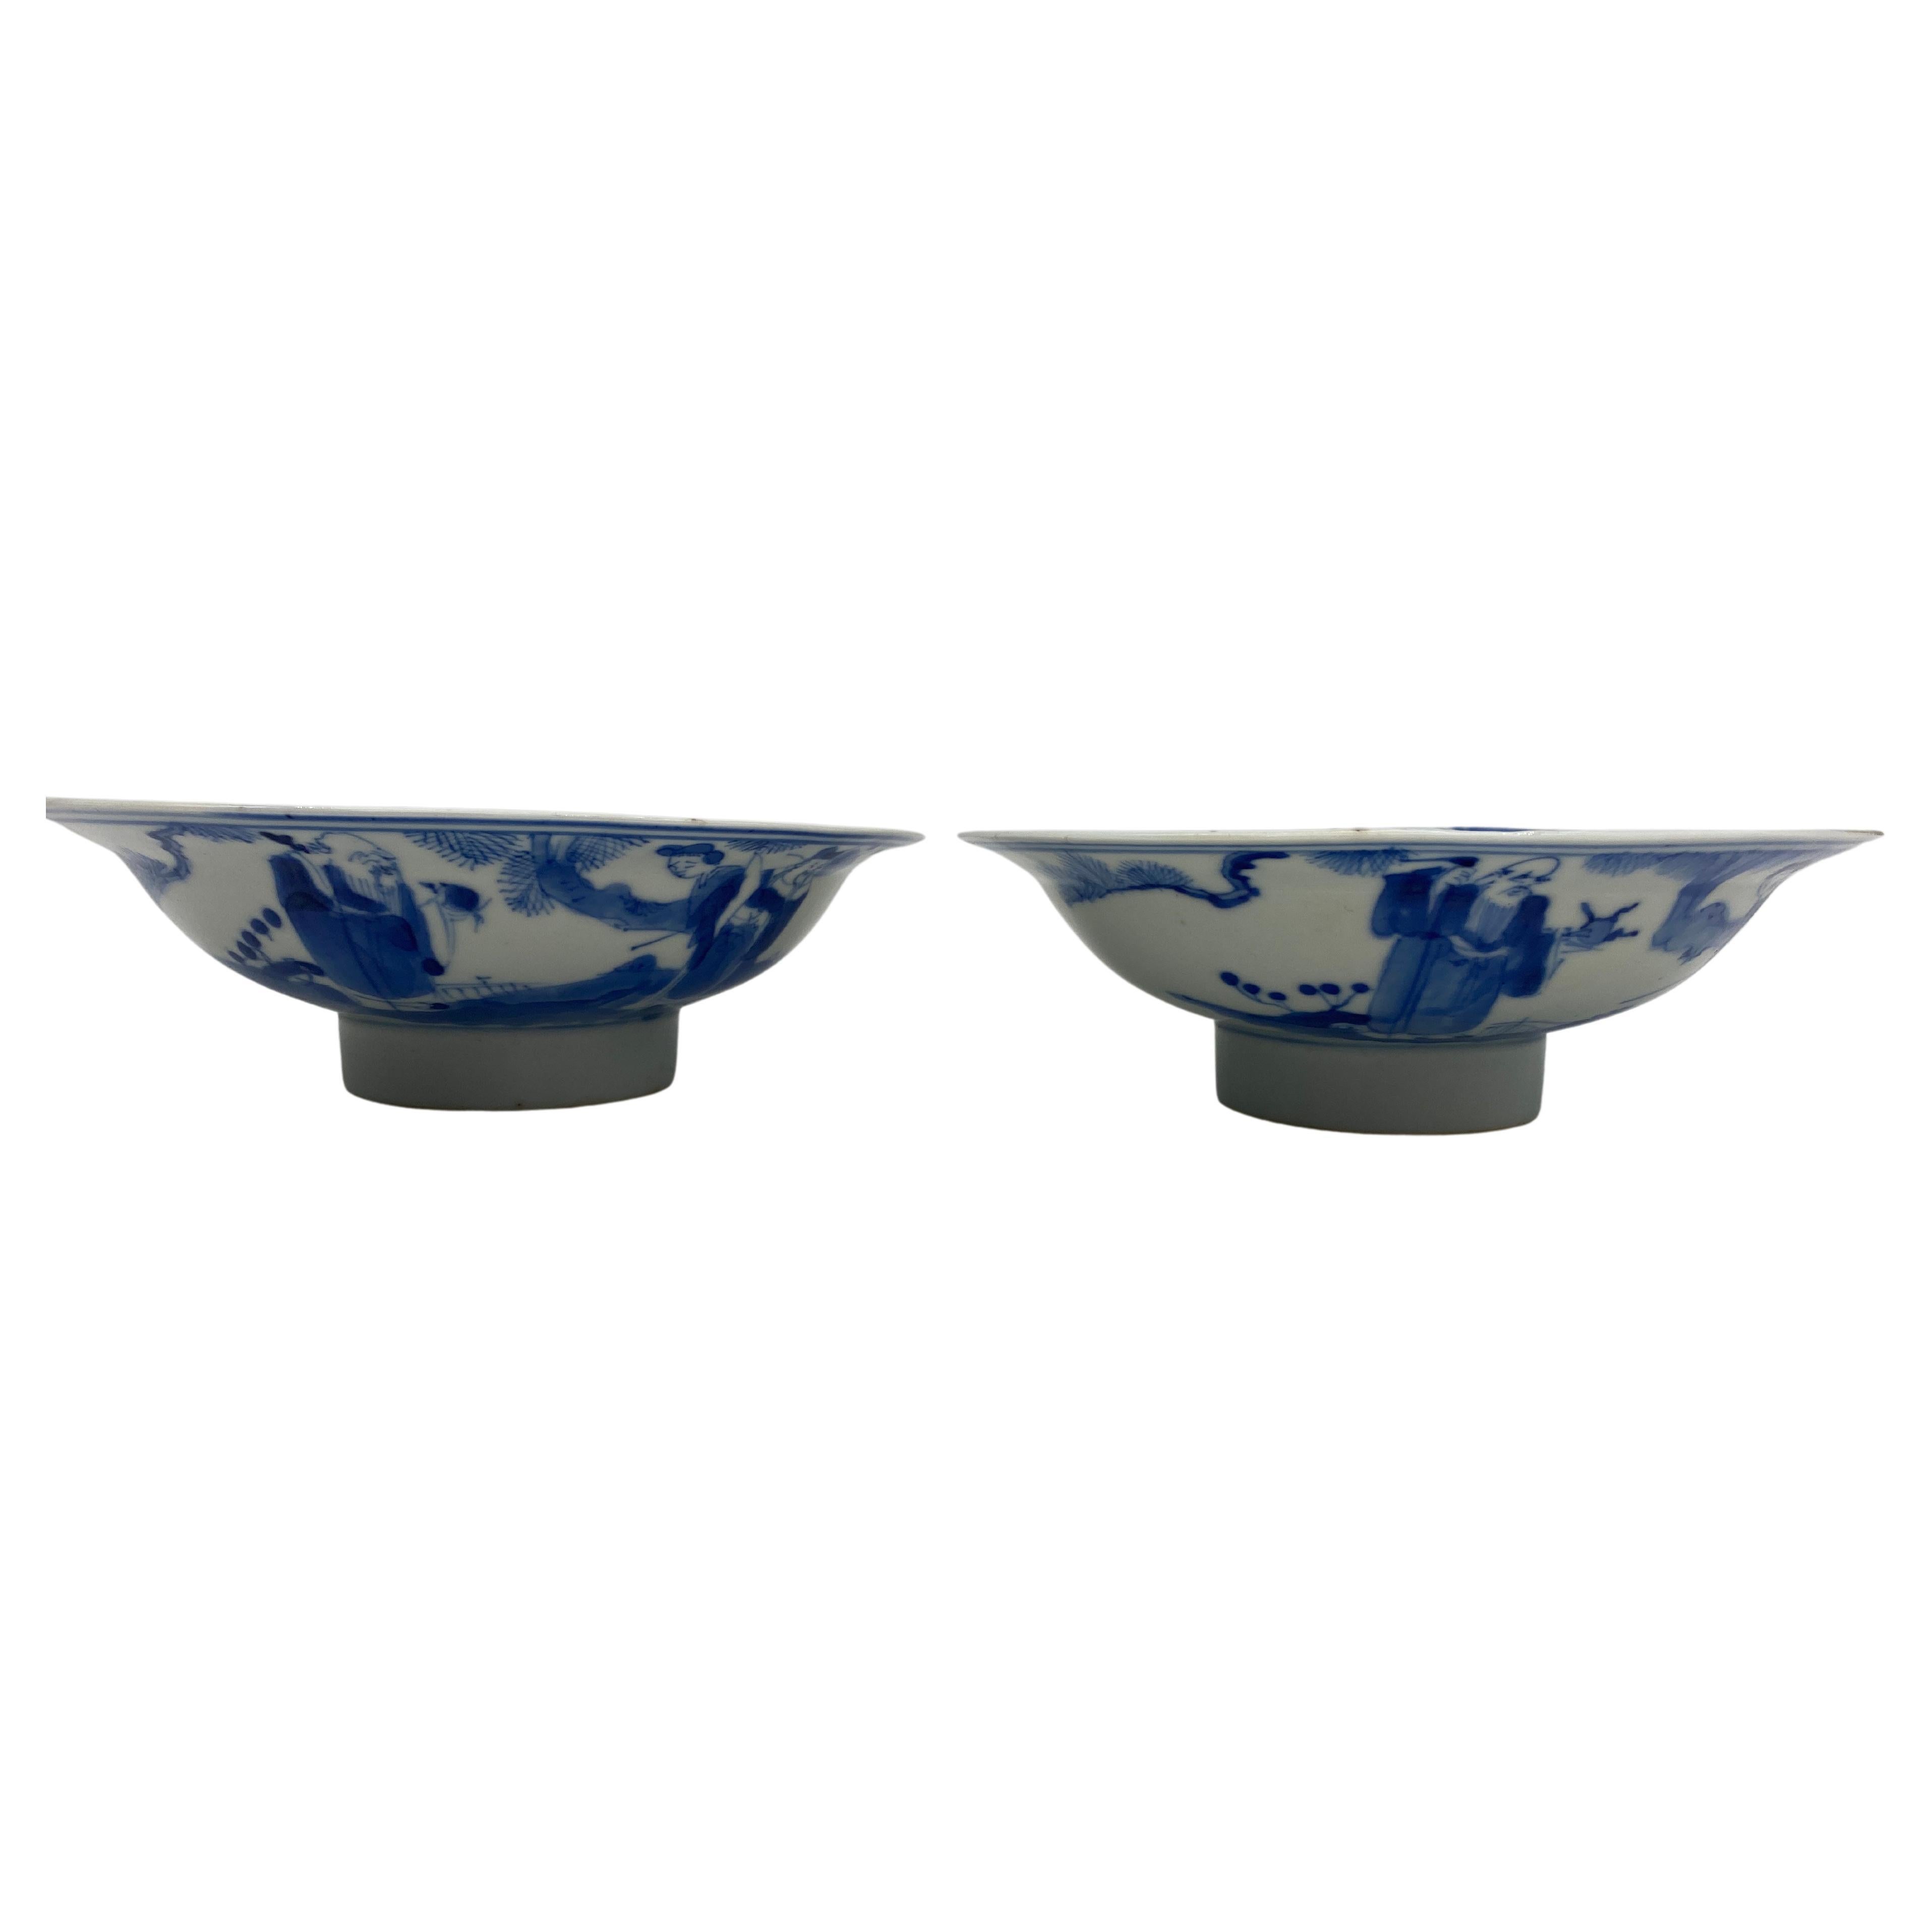 Antique Pair of Chinese Blue and White Porcelain Bowls